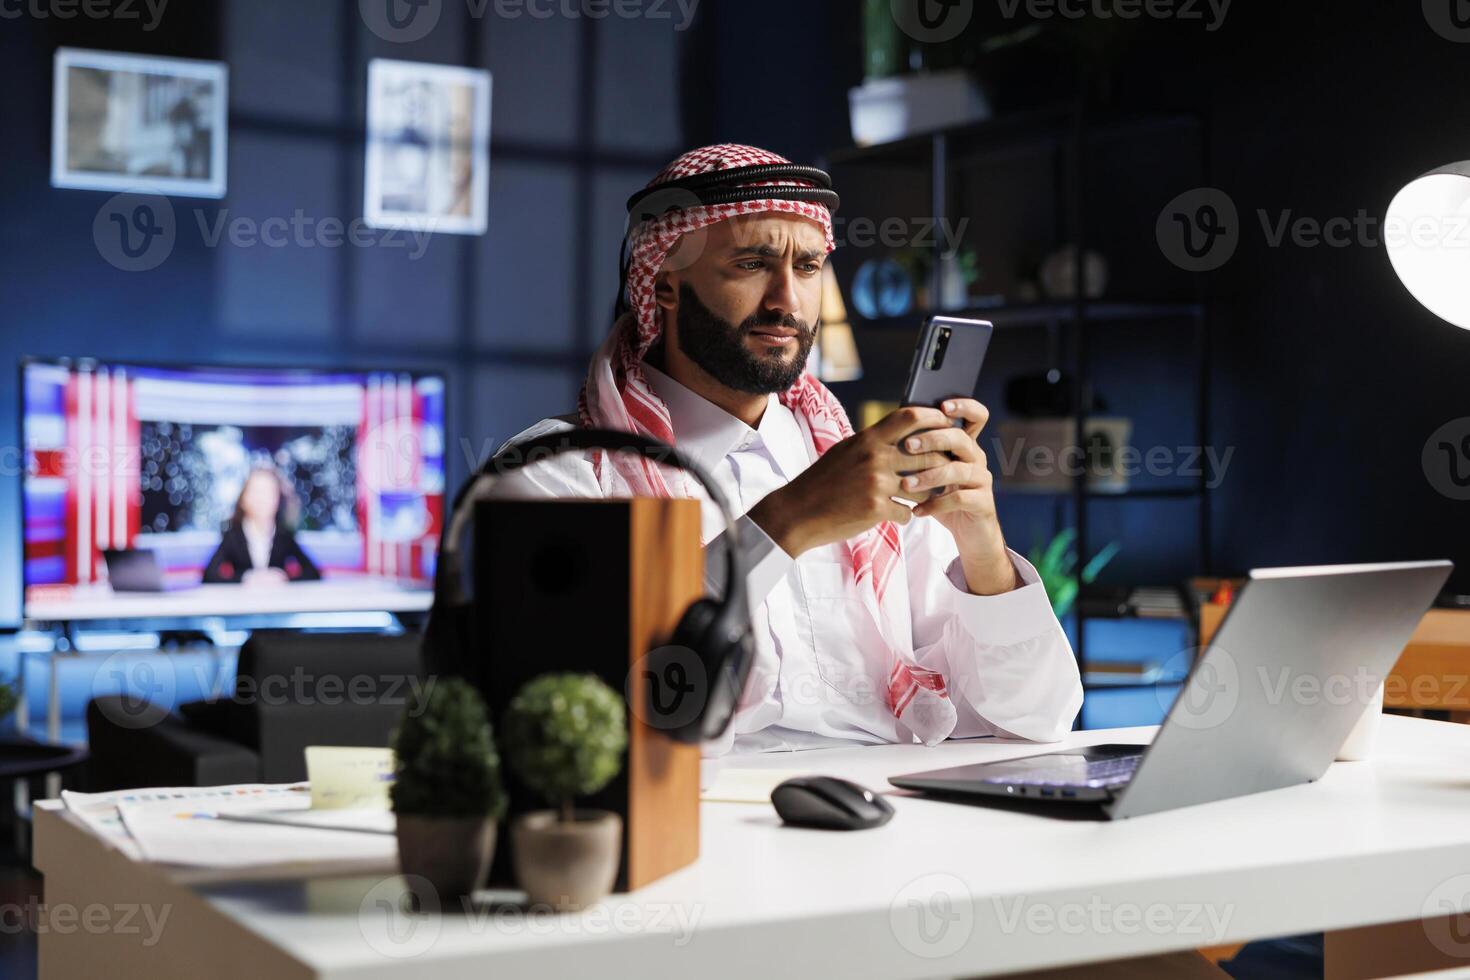 Professional Arab man works in an office, using a computer and smartphone for online research and communication. He is confident and dedicated, seamlessly combining Islamic values with technology. photo